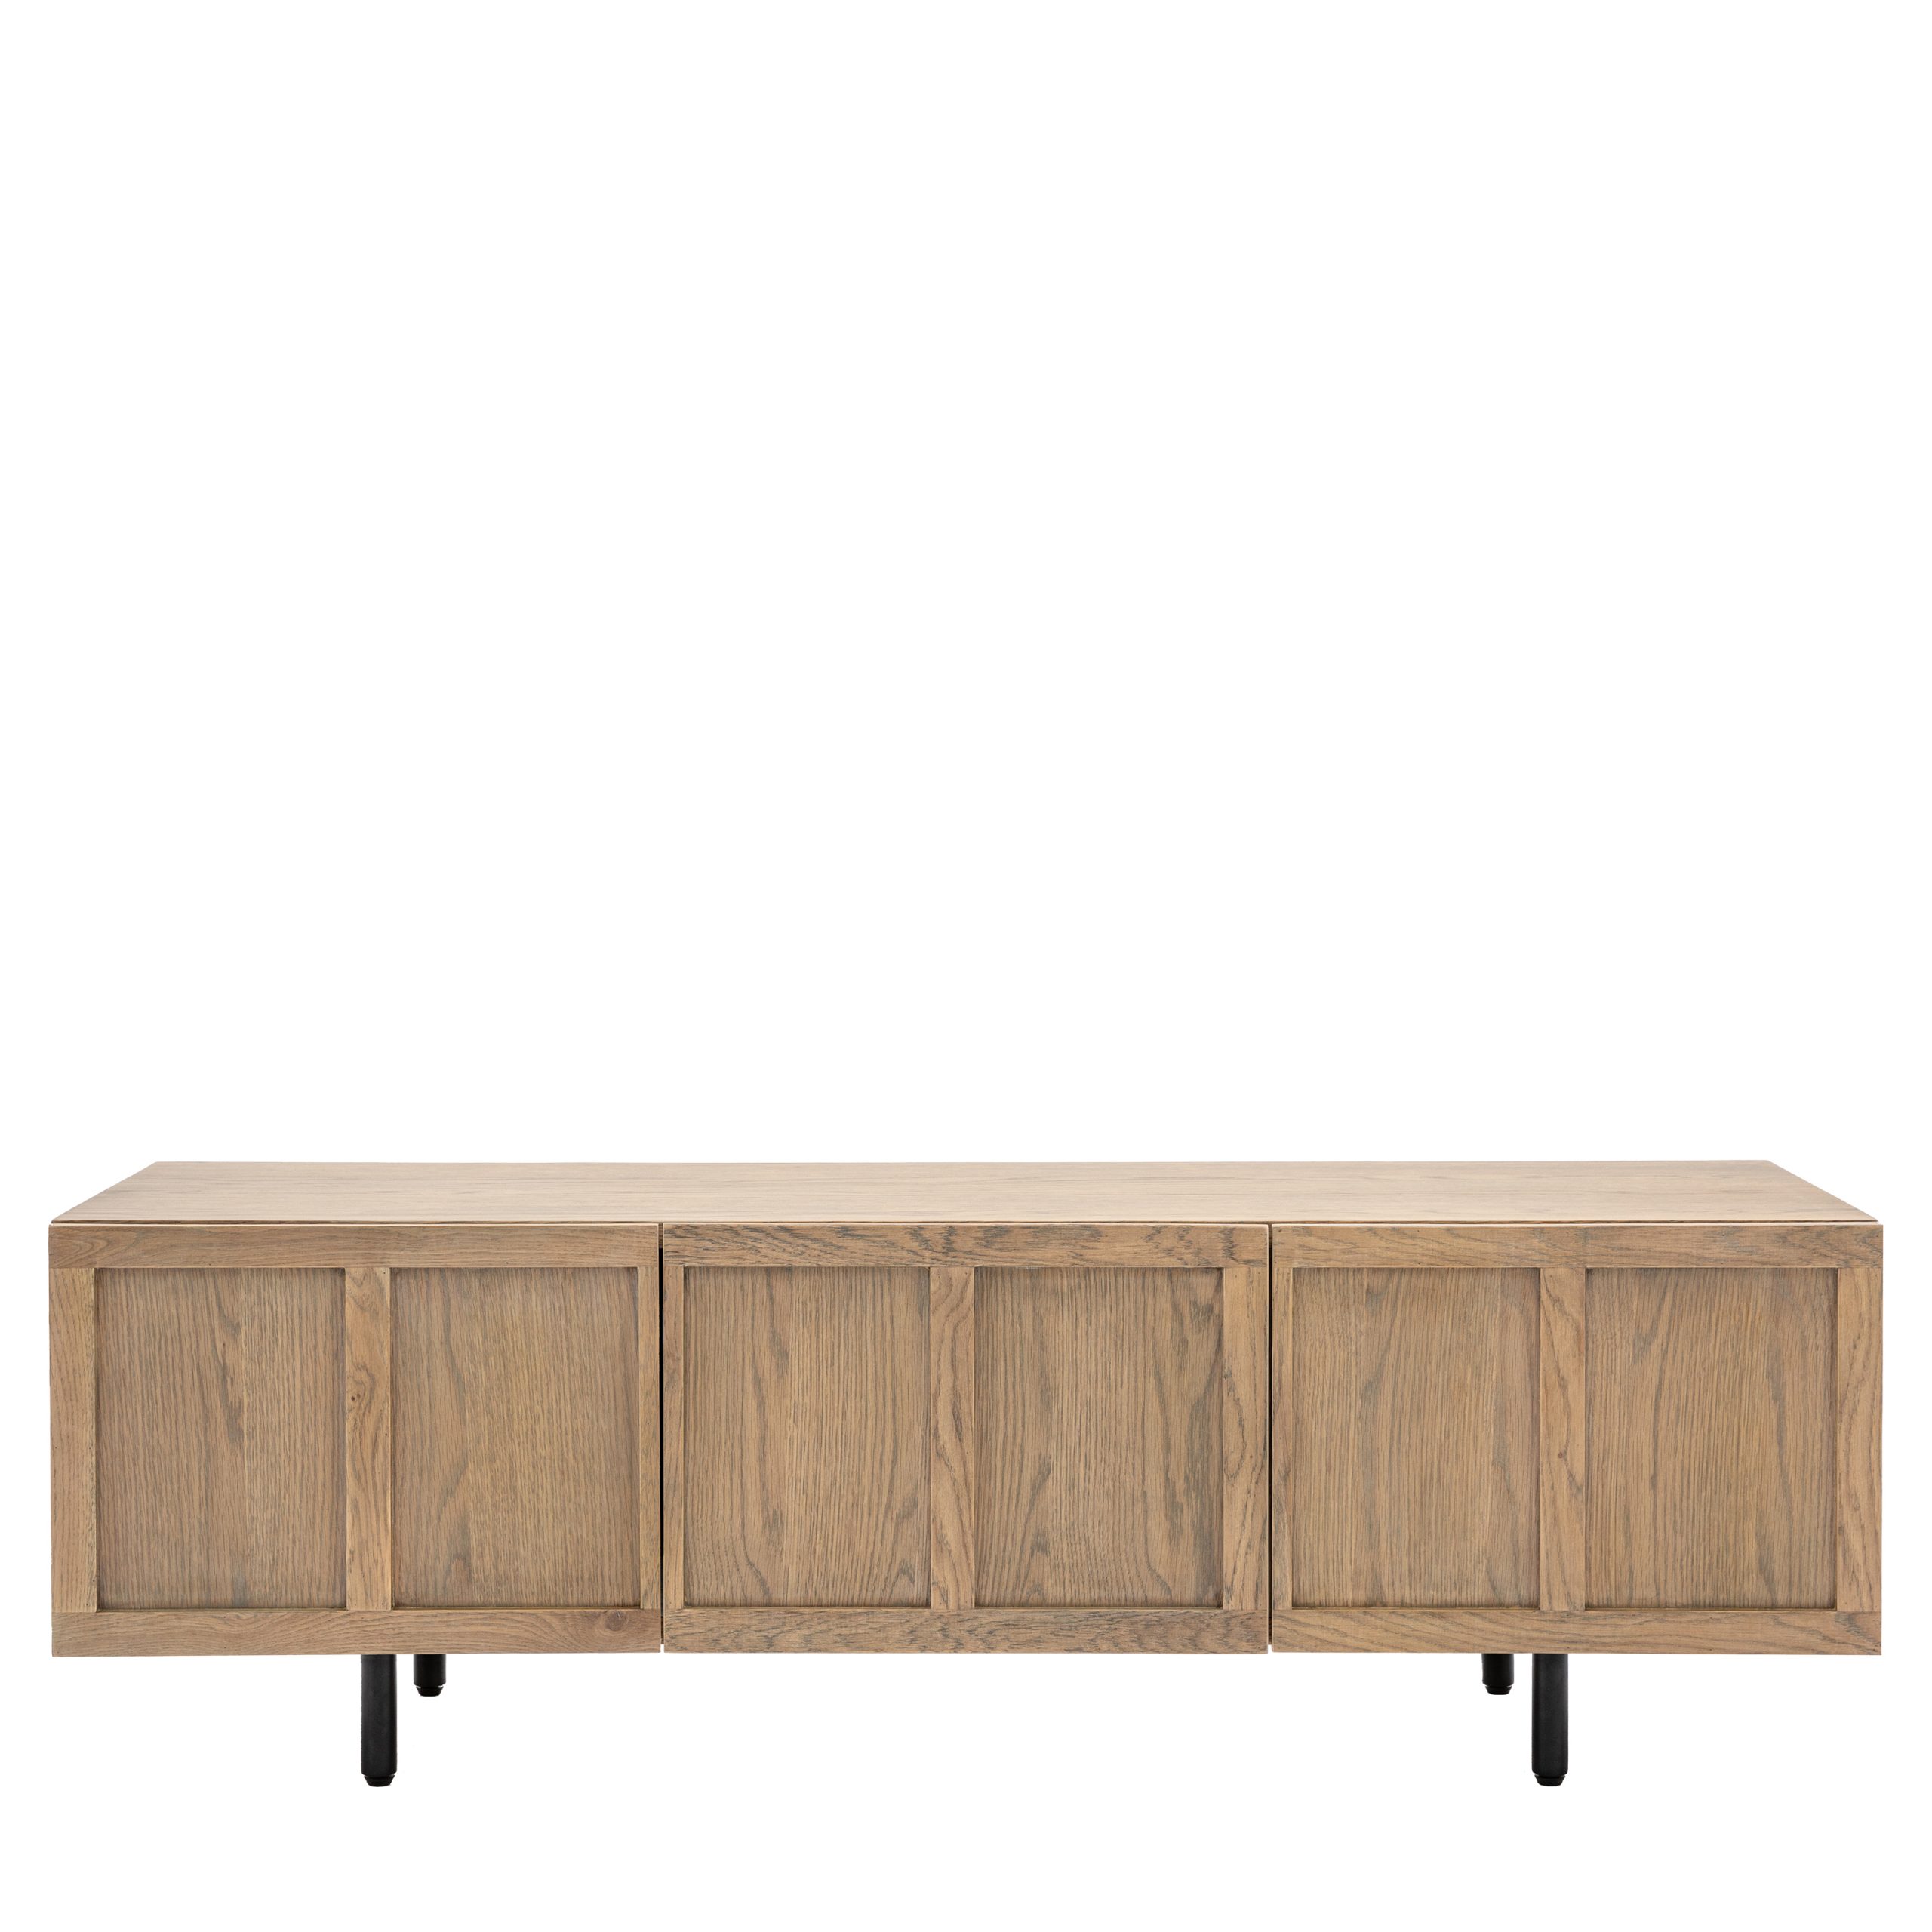 Gallery Direct Panelled Media Unit